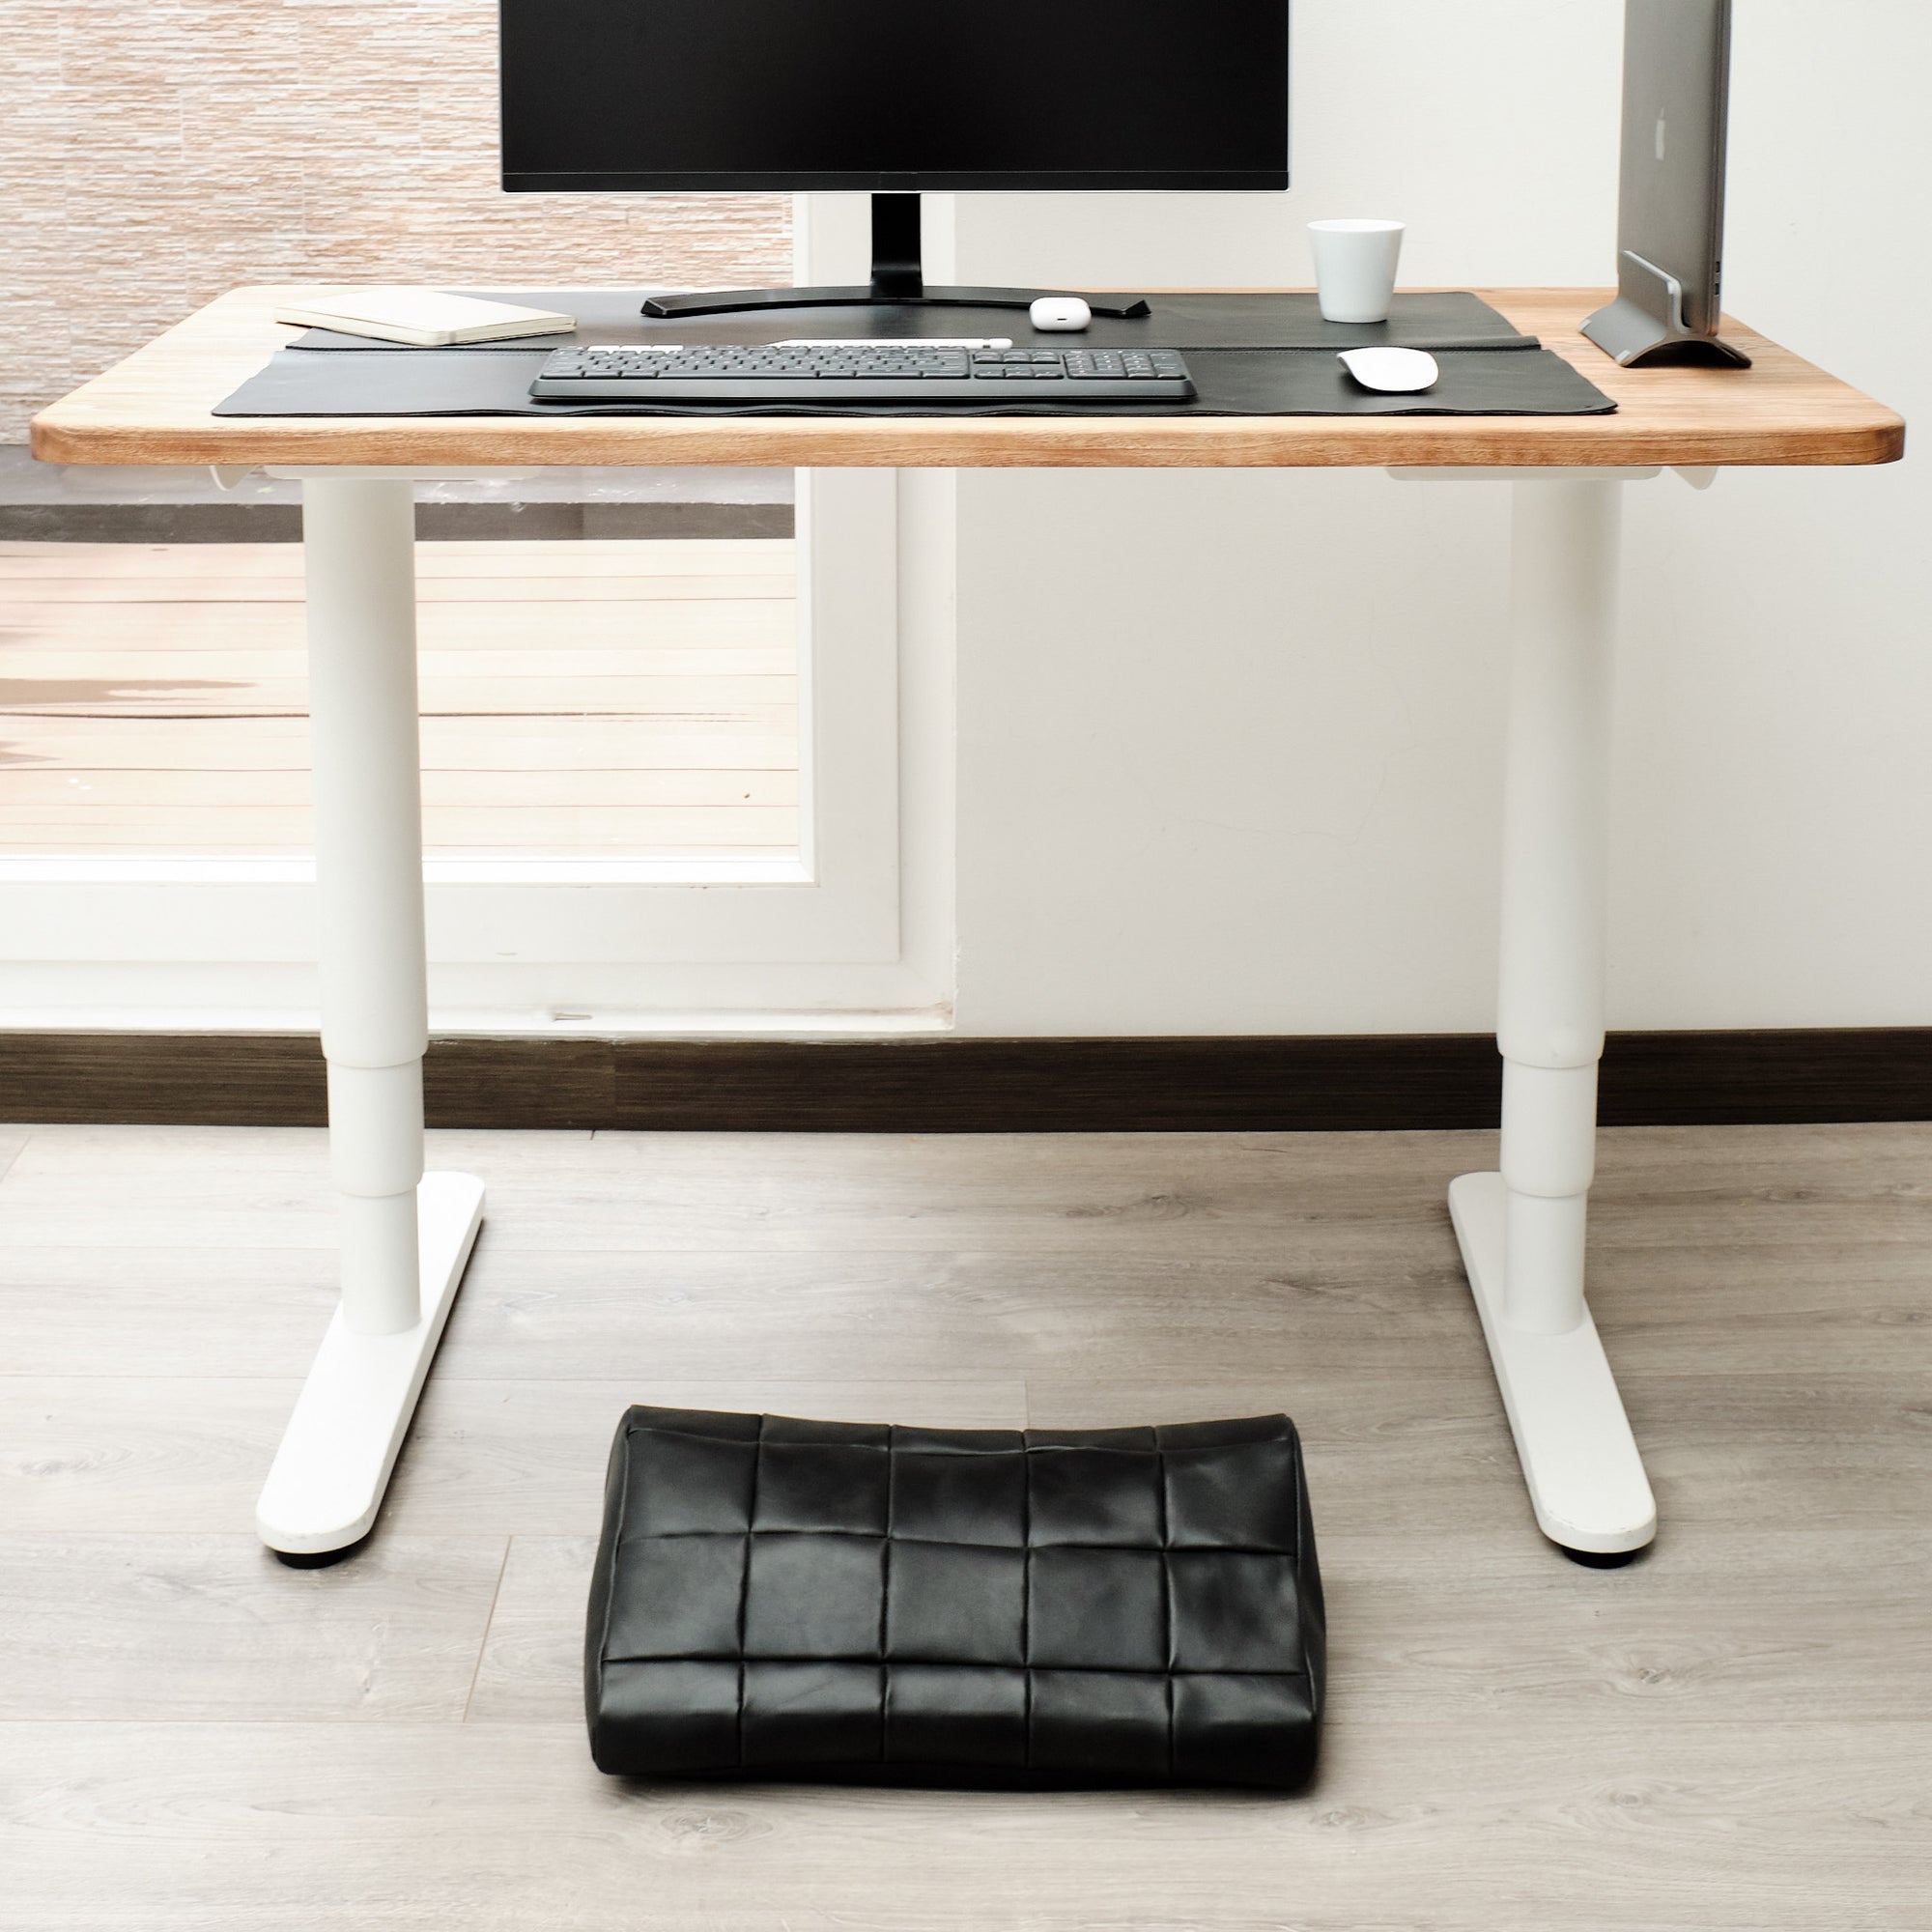 Cover. Ergonomic under desk footrest cover in black by Capra Leather